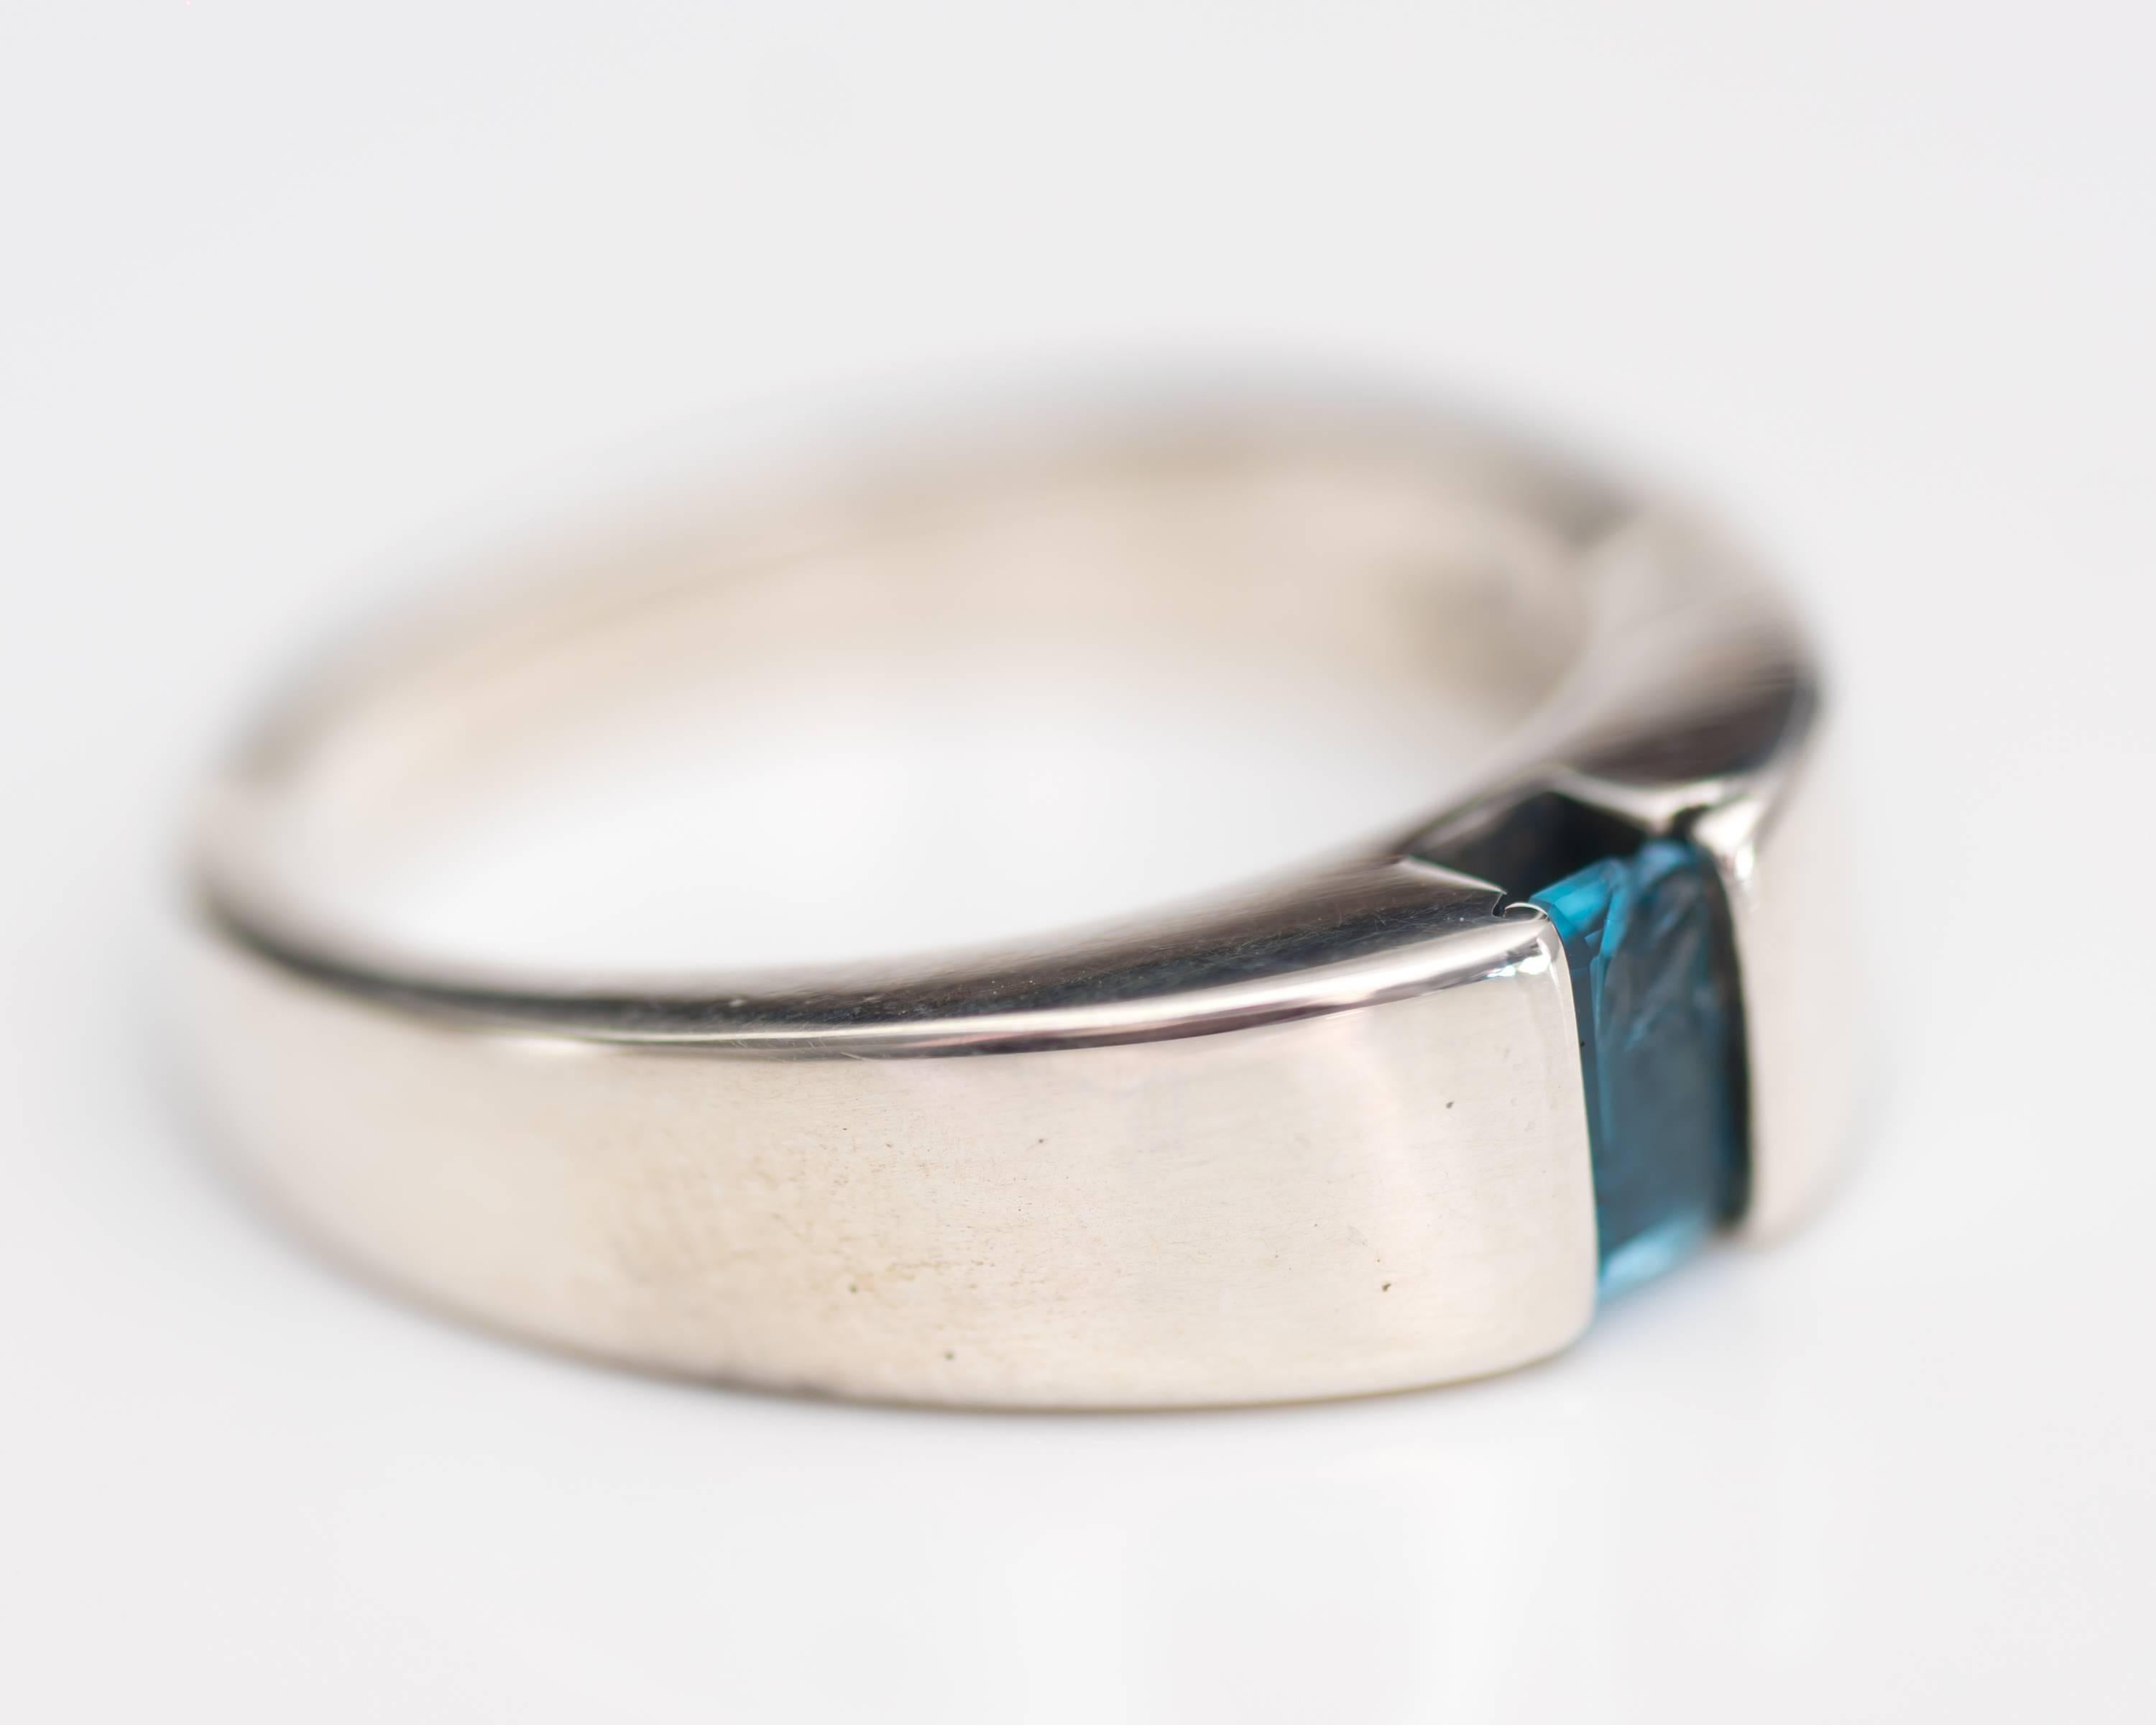 Retired Design, James Avery Meridian Ring - Sterling Silver, Blue Topaz

Iconic All-American jewelry designer James Avery keeps things simple.
This beautifully designed modern ring exemplifies his distinctive style. This sleek ring is crafted from